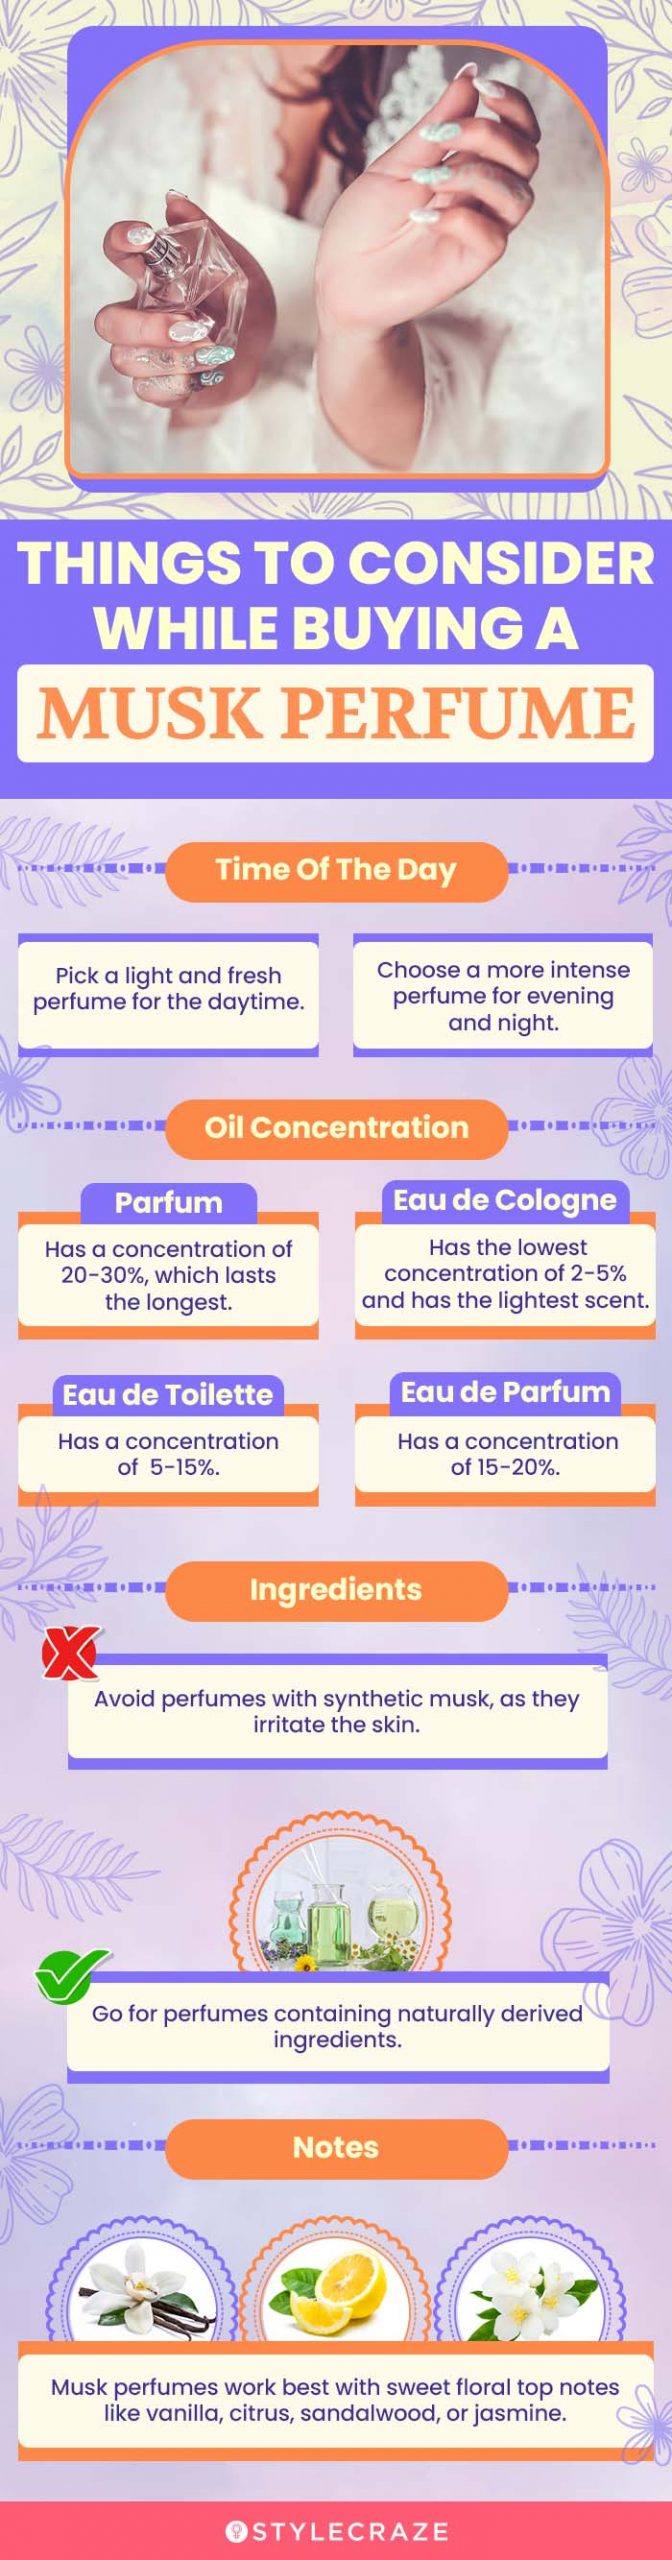 Things To Consider While Buying Musk Perfume (infographic)